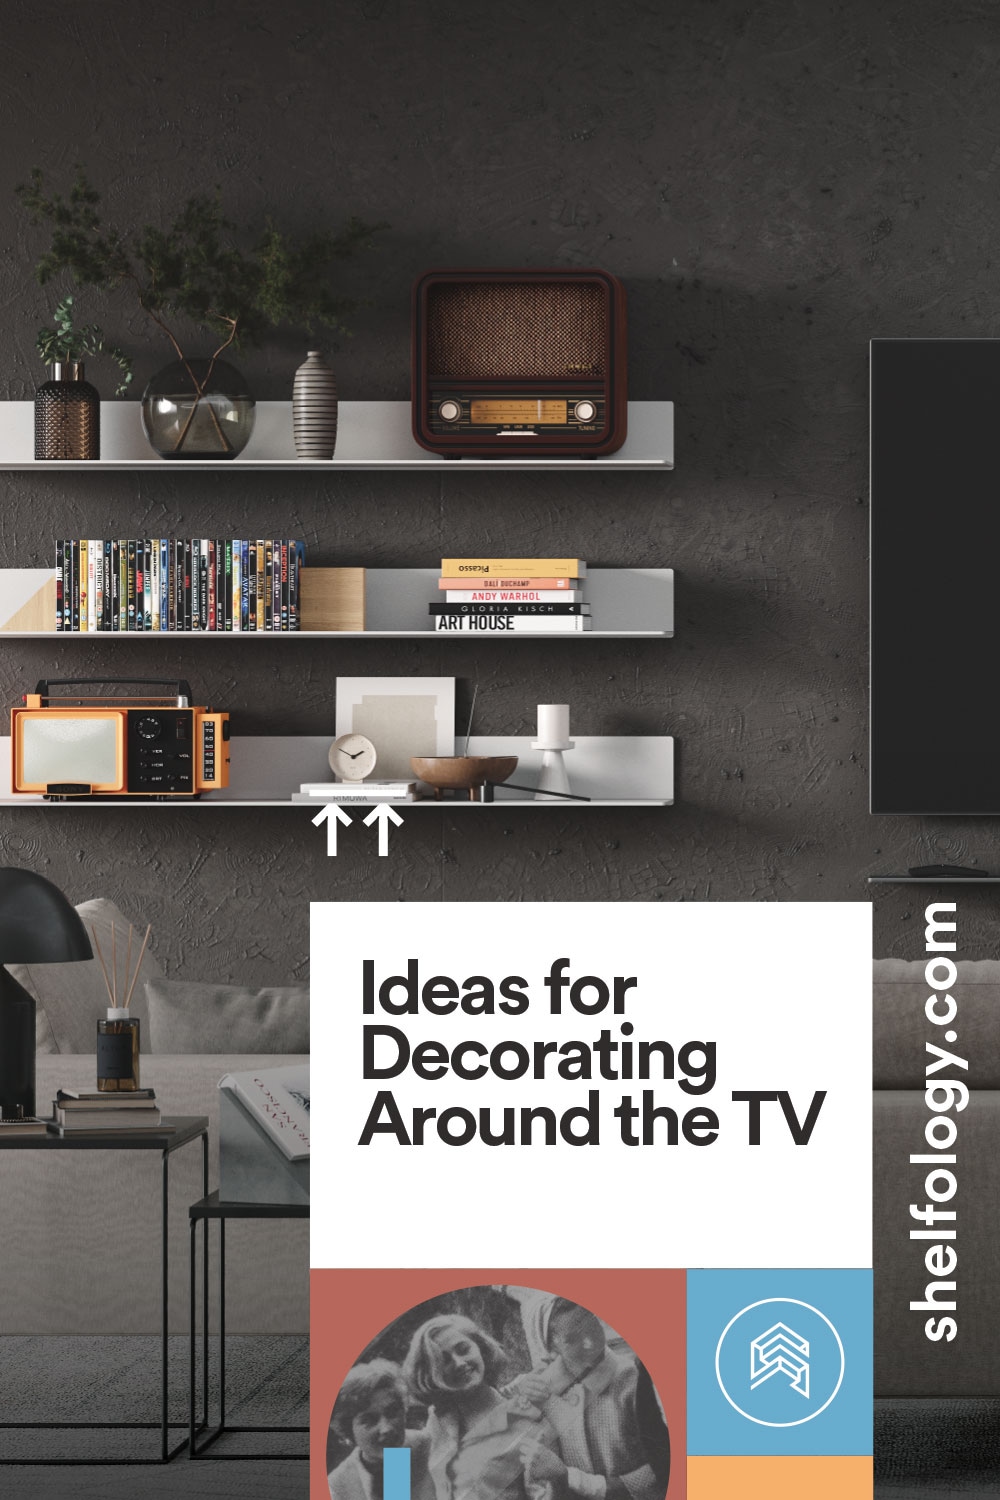 7 Ideas for Decorating Around the TV